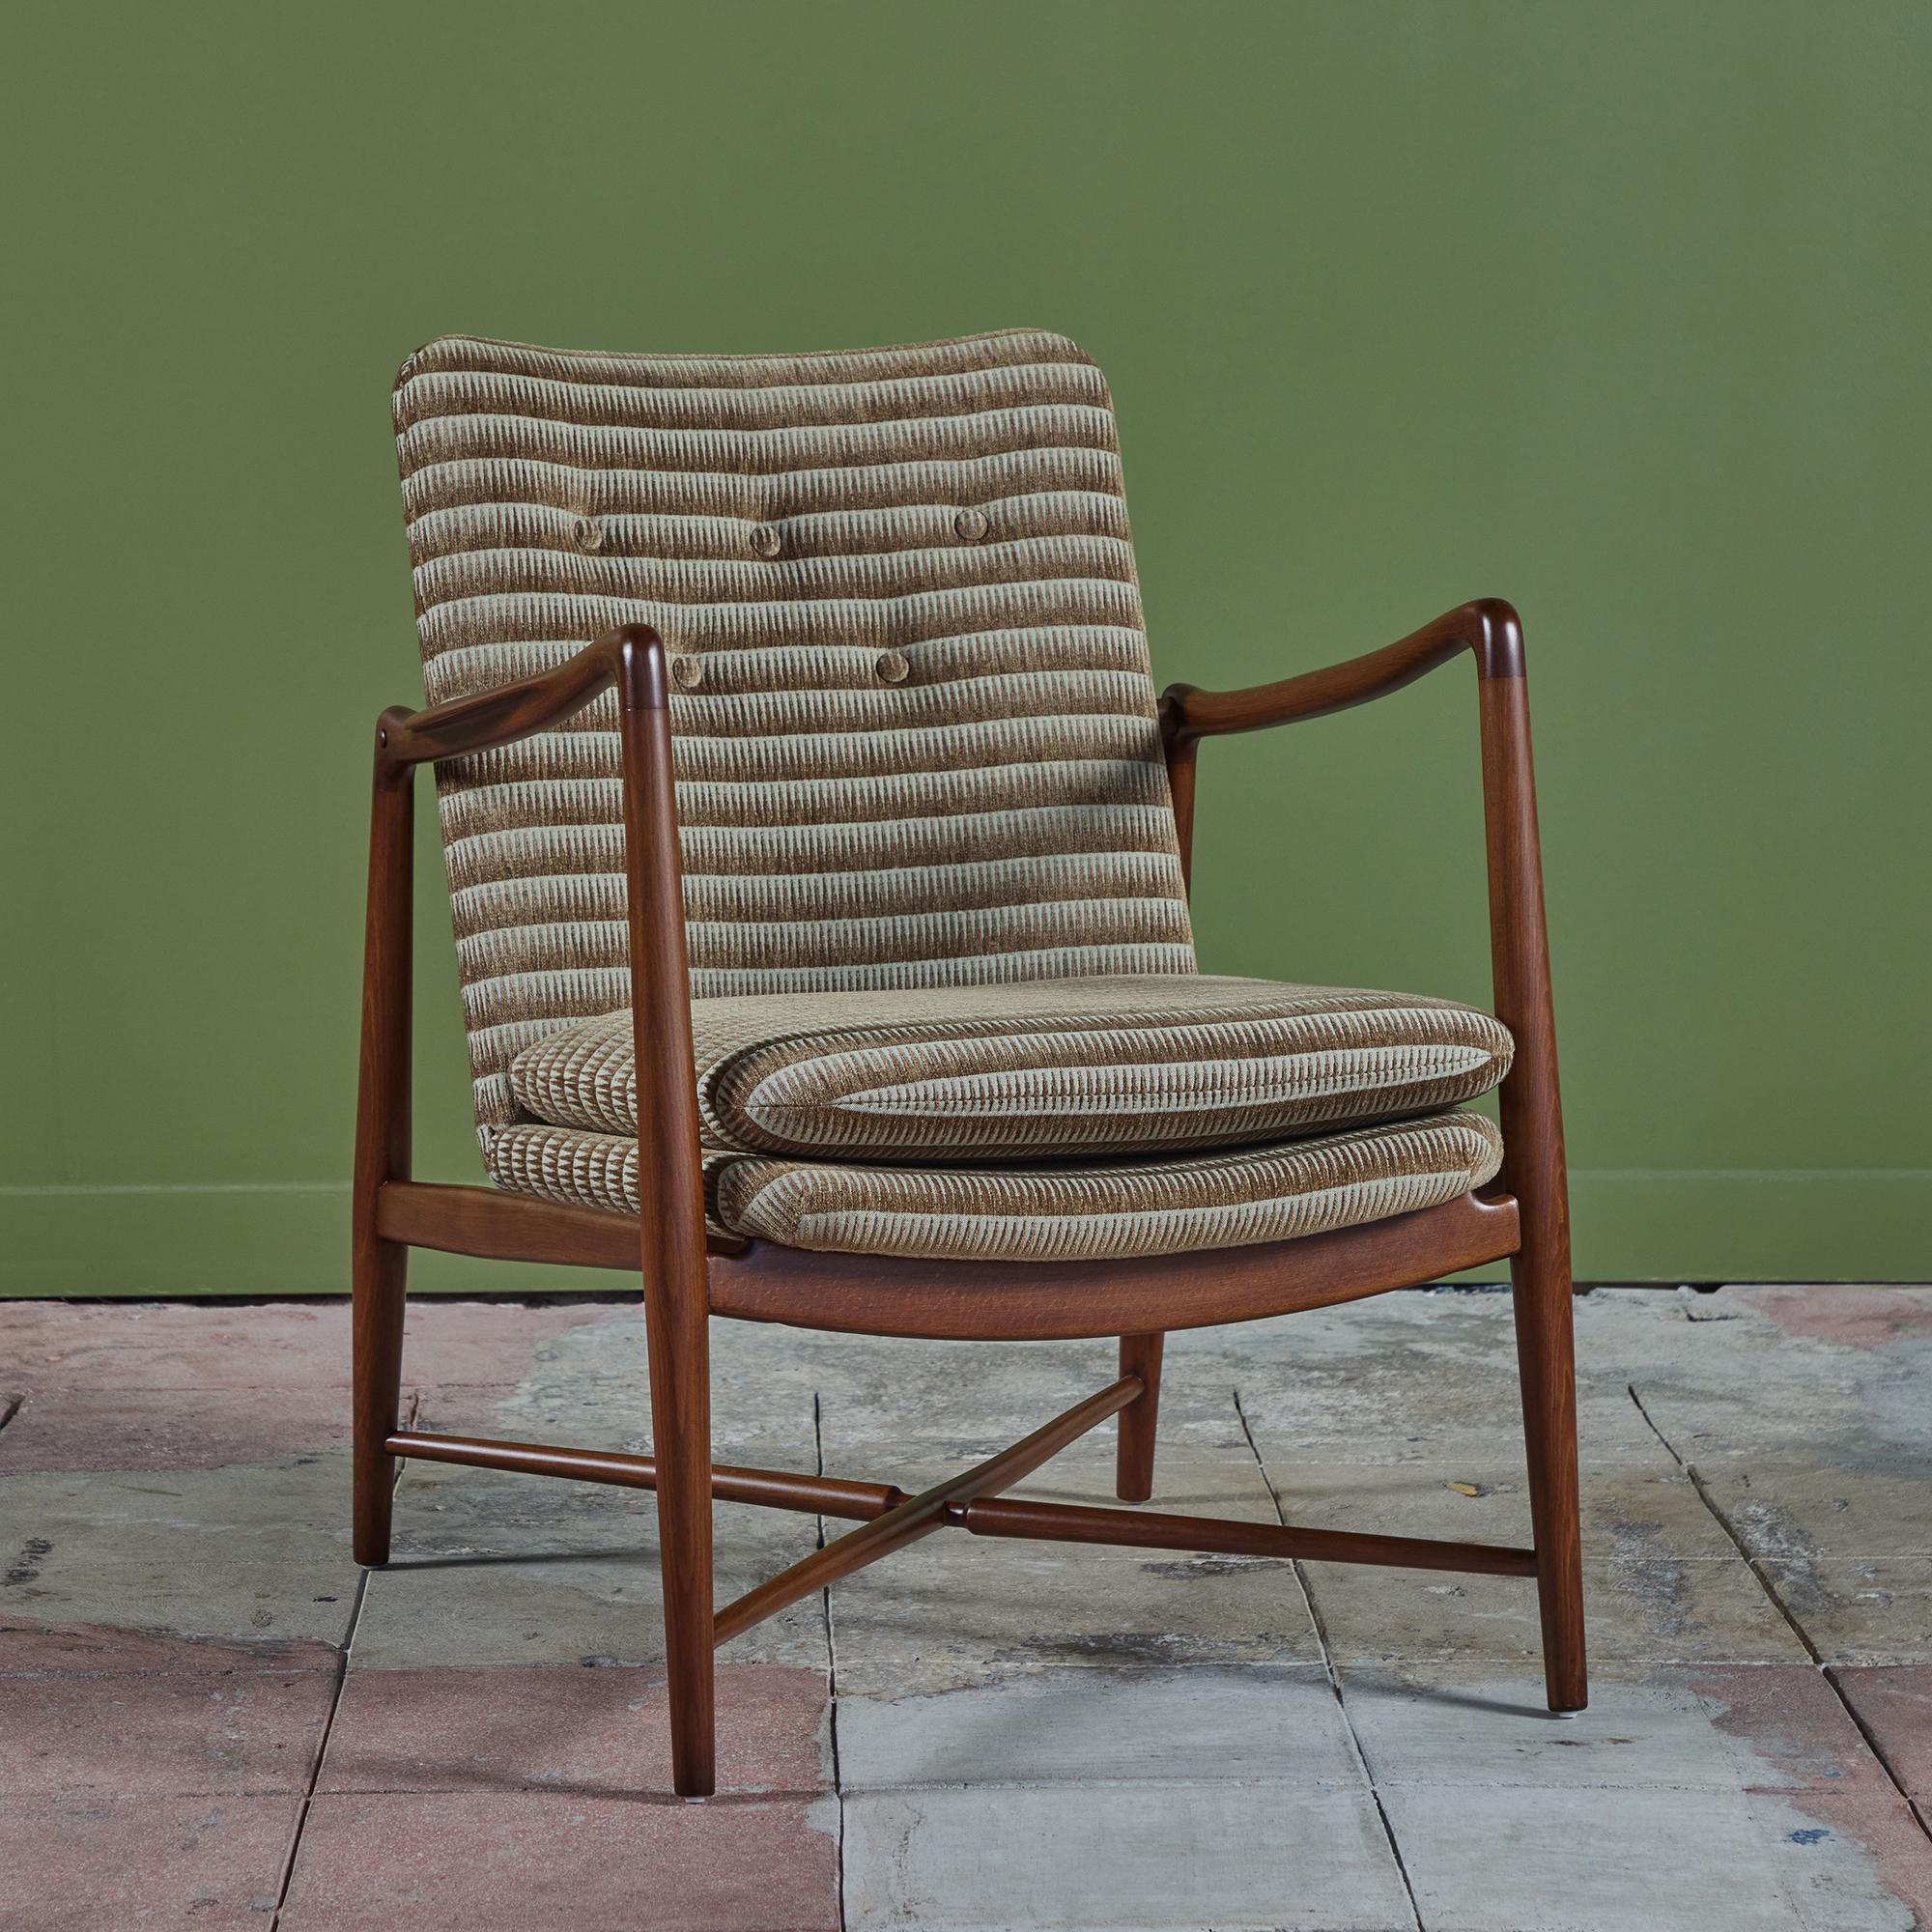 Designed in 1946 by Finn Juhl for Bovirke, the Model BO-59 lounge chair is a rare design equally comfortable as it is beautiful. This piece has been fully restored in collaboration with Elizabeth Law of Elizabeth Law Design. Born and raised in South